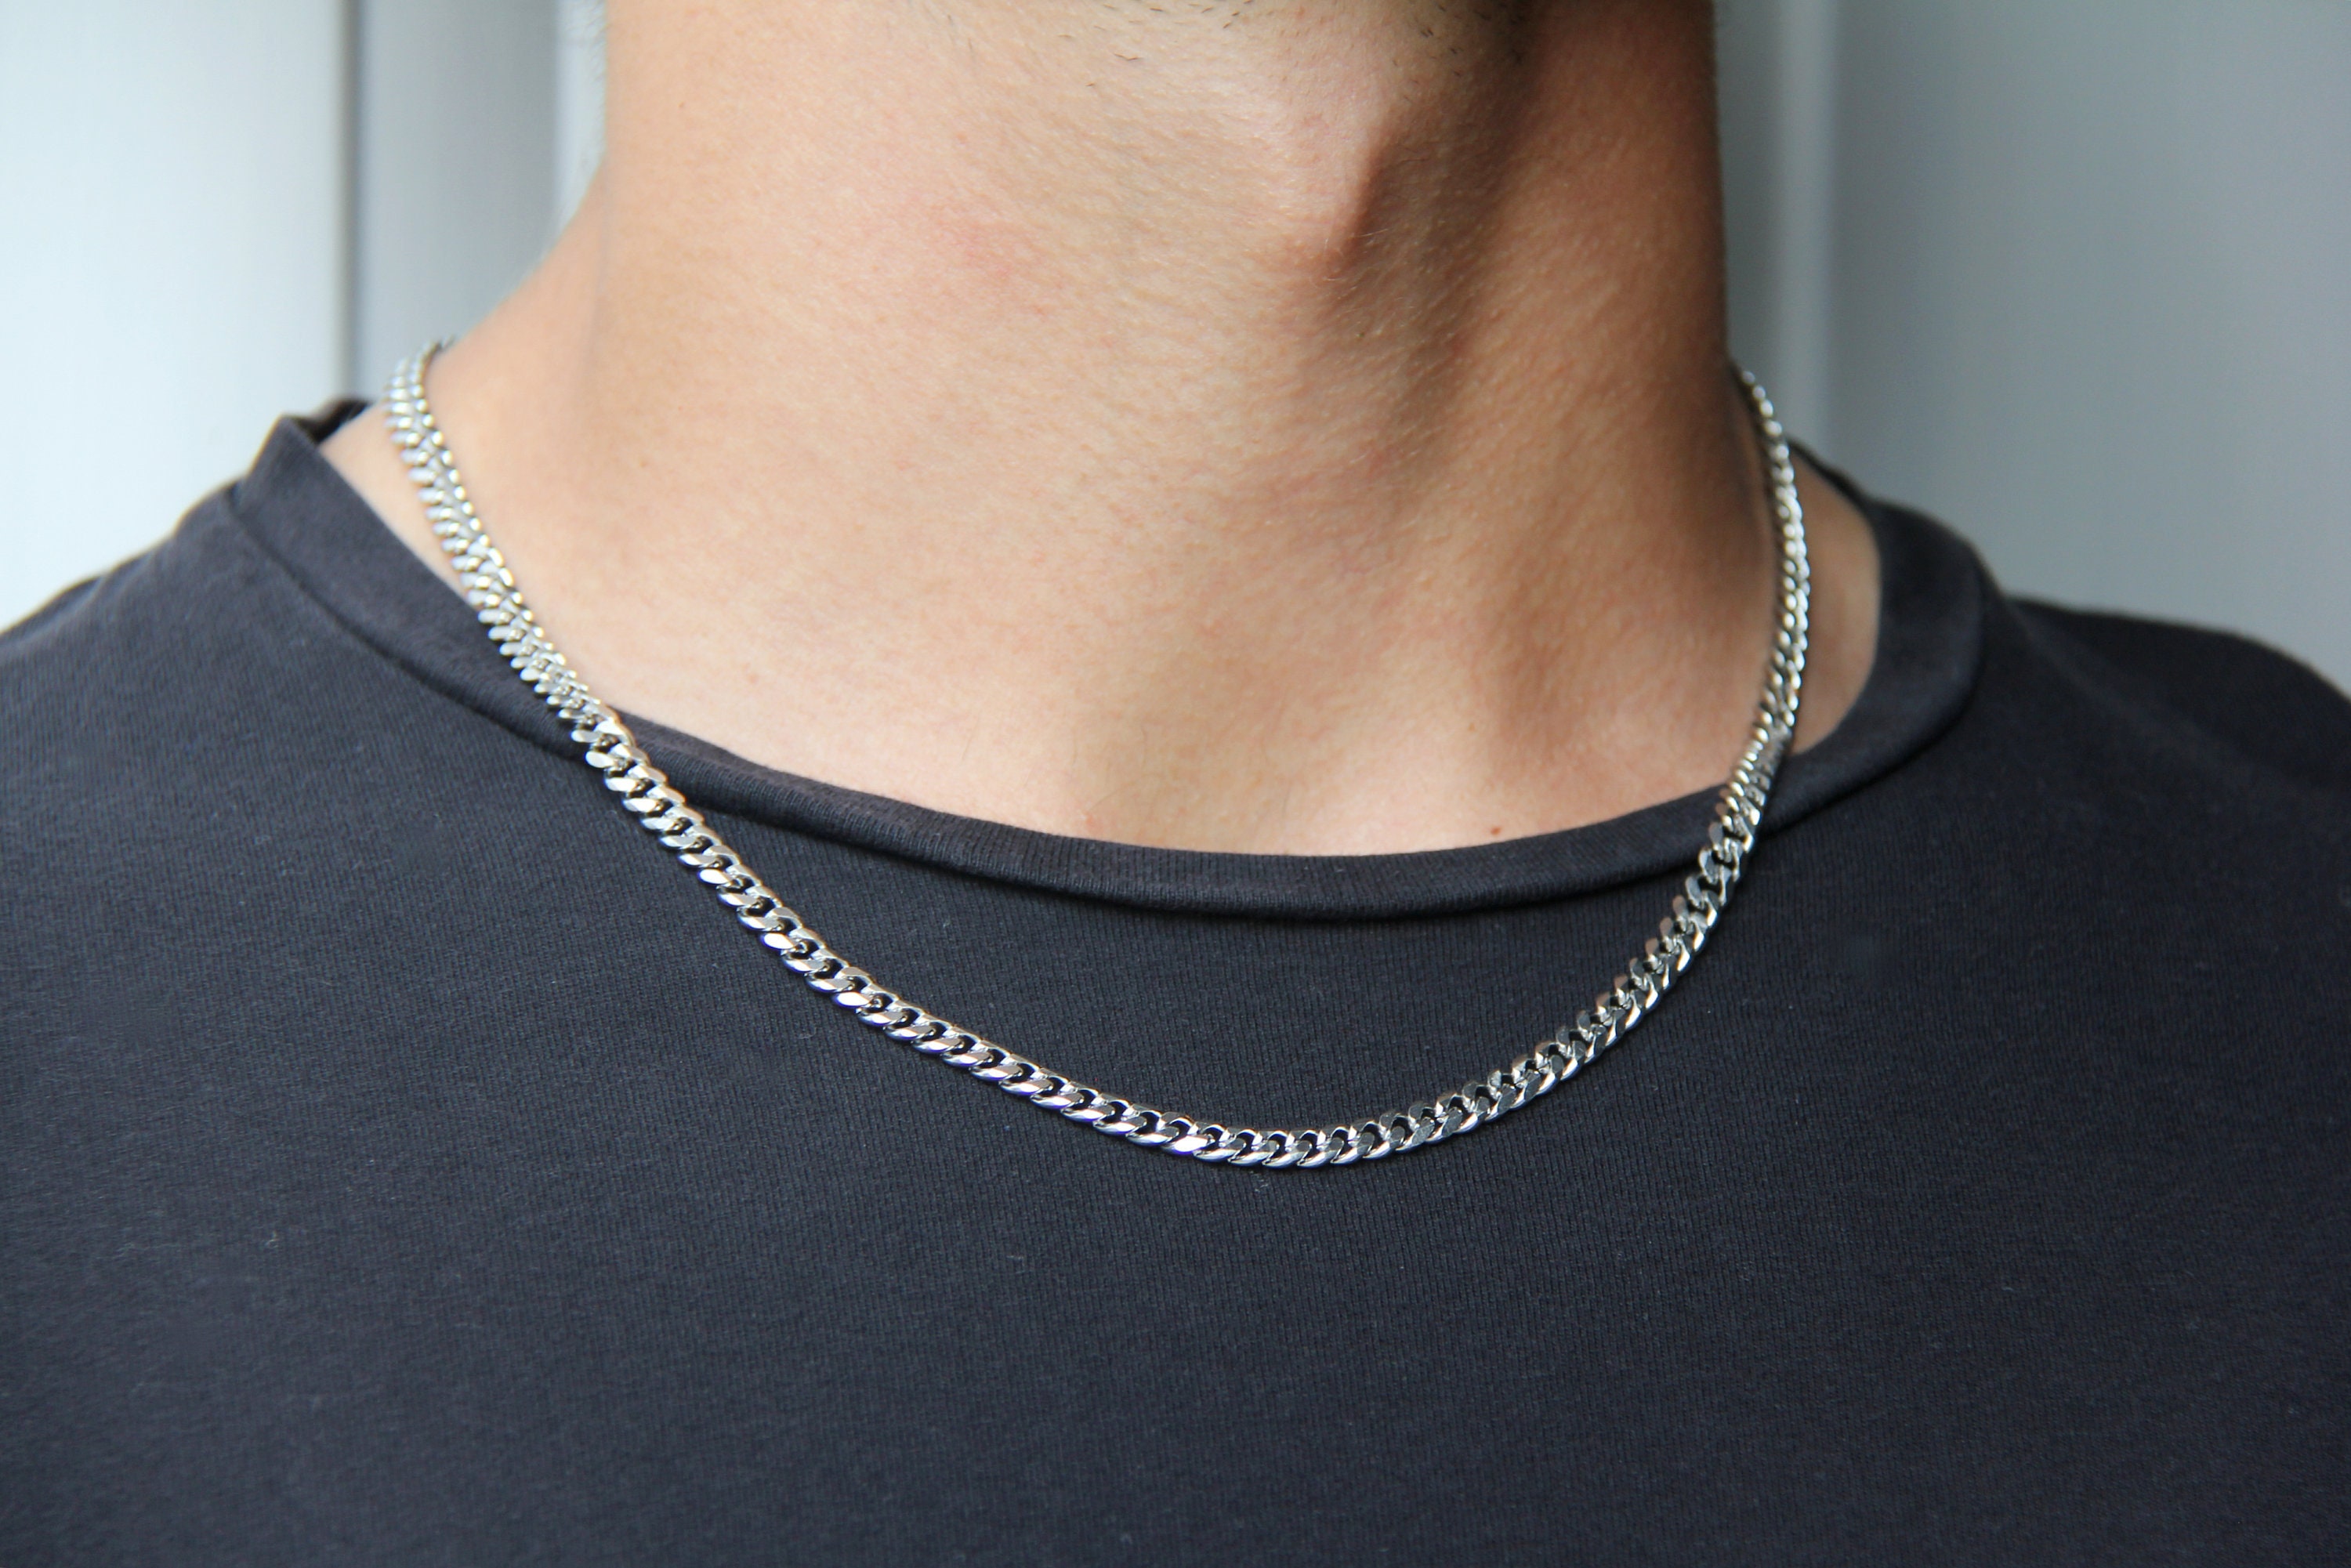 Thin Silver Snake Chain Necklace, Mens Silver Necklace Chain Round Silver  Chain for Men Minimalist Jewelry by Twistedpendant -  Norway